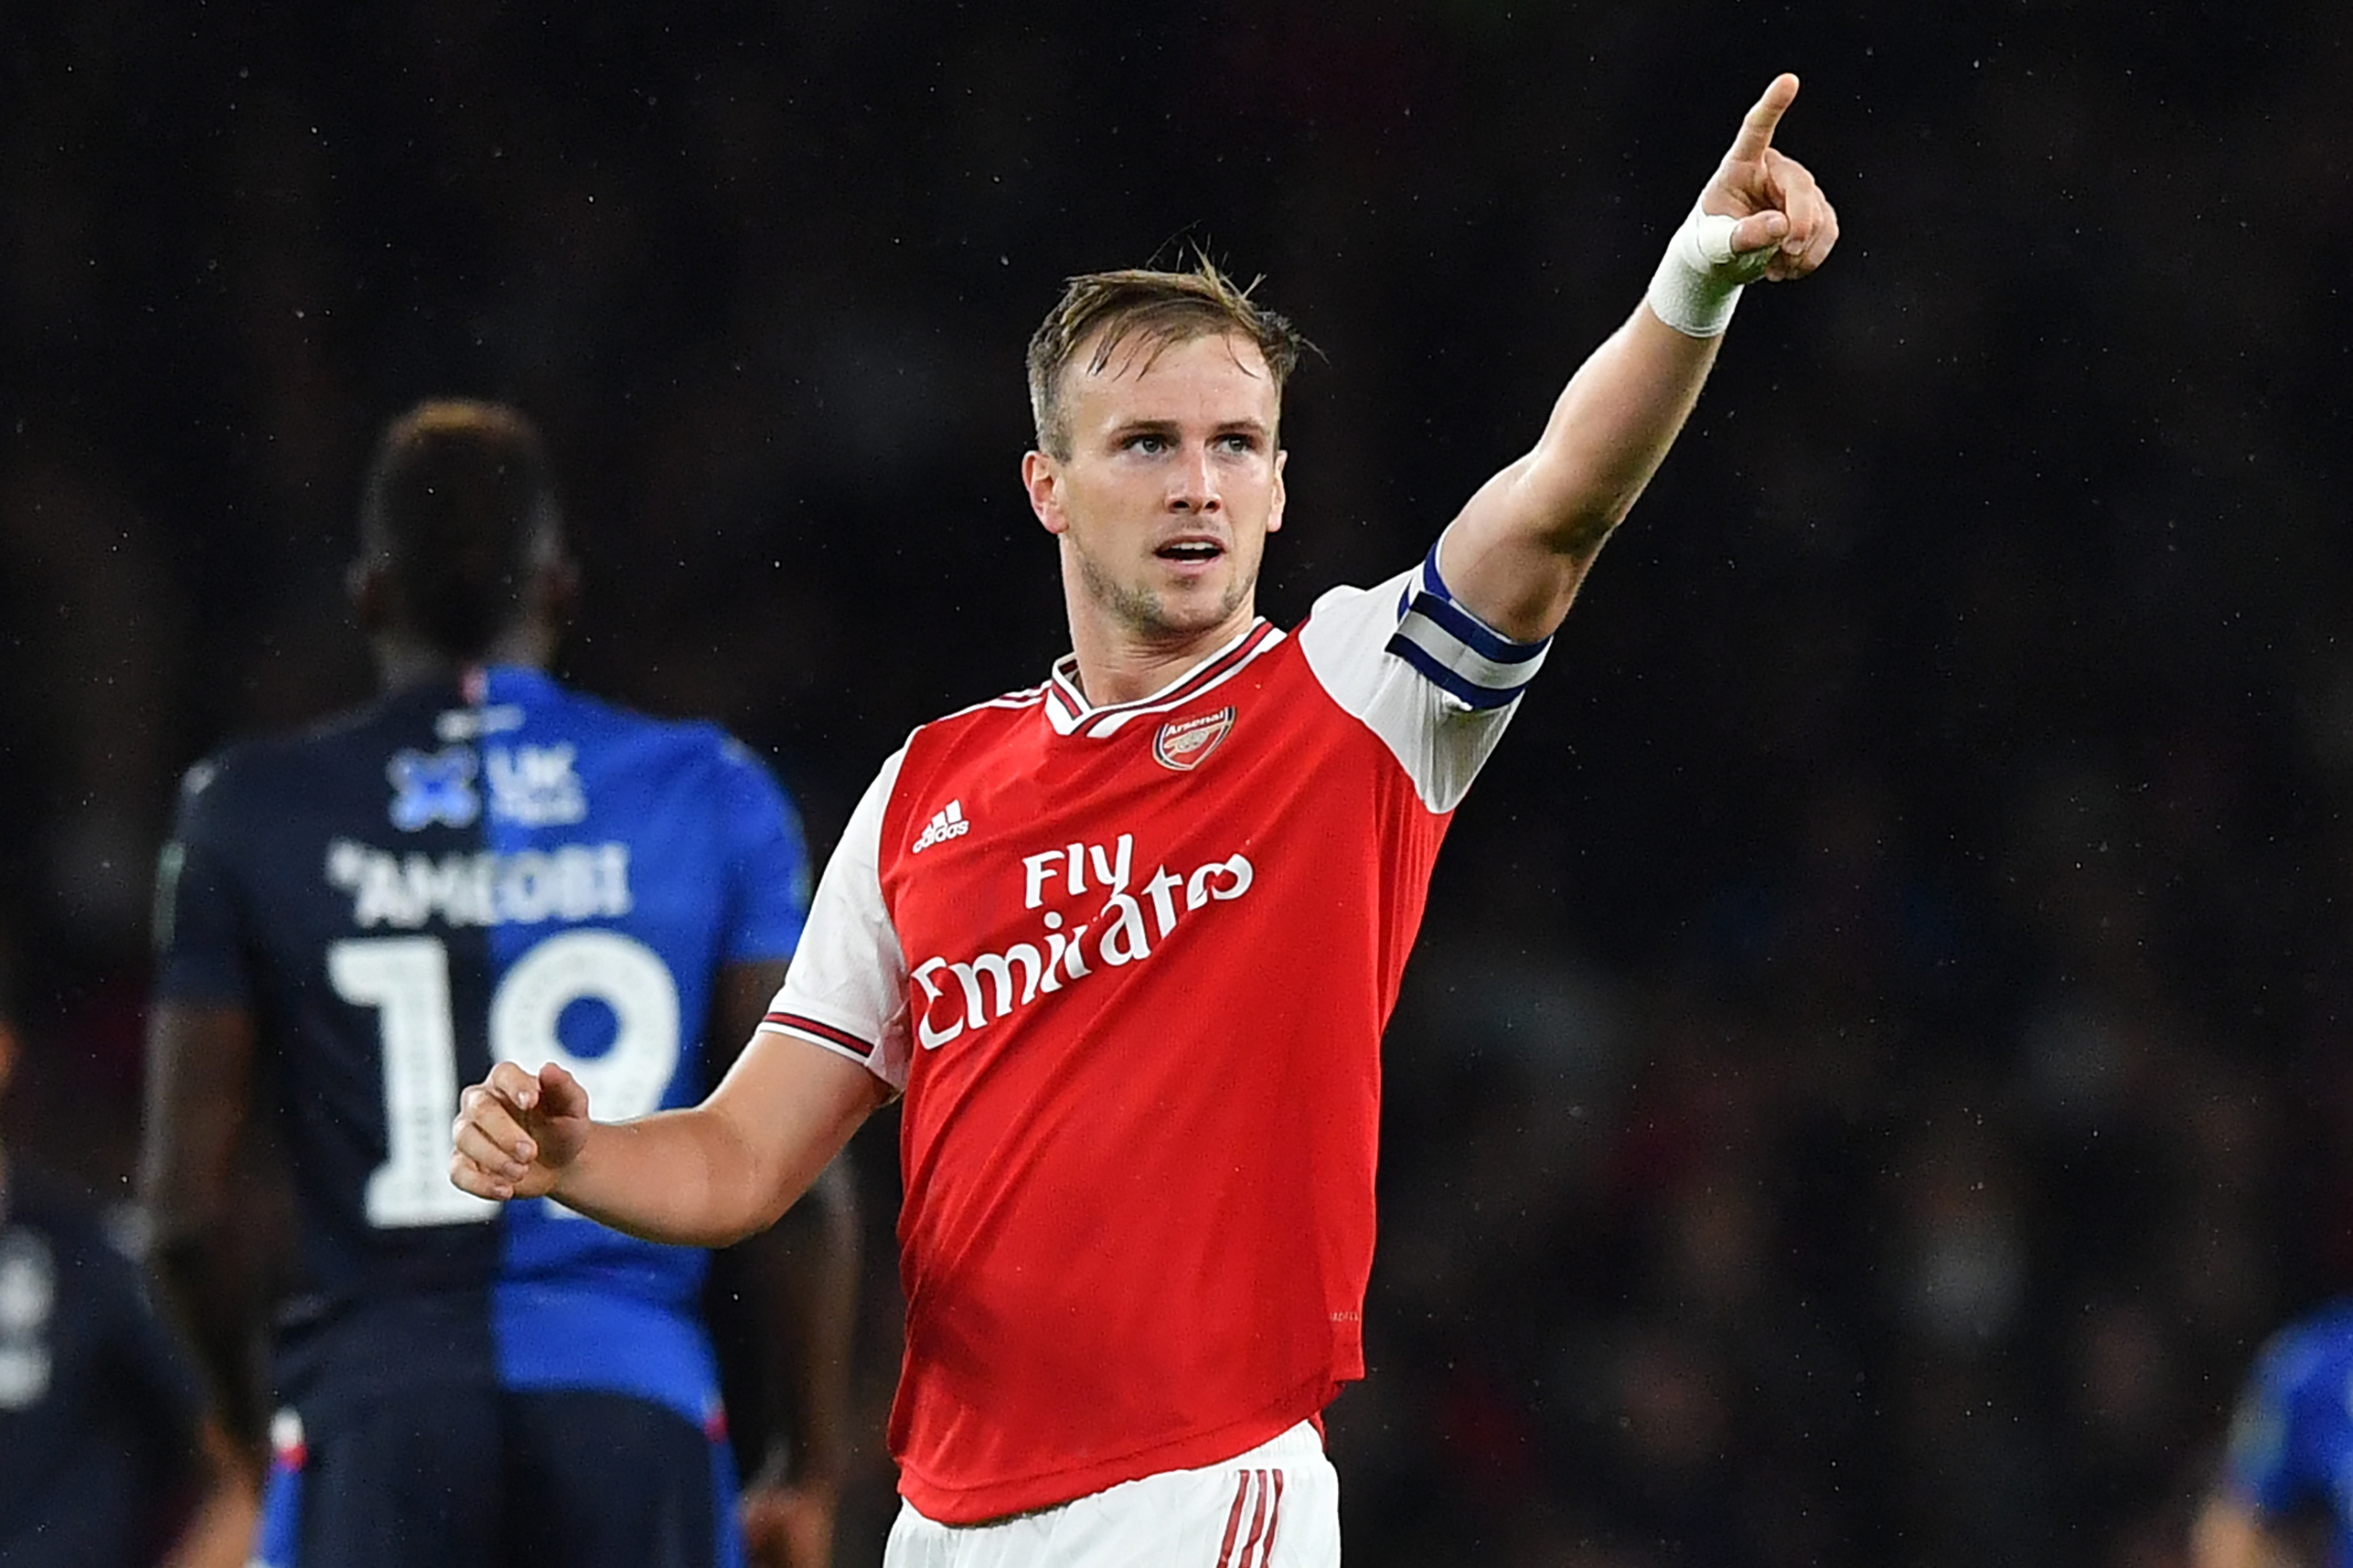 Arsenal's English defender Rob Holding (C) celebrates scoring his team's second goal during the English League Cup third round football match between Arsenal and Nottingham Forest at the Emirates Stadium in London on September 24, 2019. (Photo by Ben STANSALL / AFP) / RESTRICTED TO EDITORIAL USE. No use with unauthorized audio, video, data, fixture lists, club/league logos or 'live' services. Online in-match use limited to 120 images. An additional 40 images may be used in extra time. No video emulation. Social media in-match use limited to 120 images. An additional 40 images may be used in extra time. No use in betting publications, games or single club/league/player publications. /         (Photo credit should read BEN STANSALL/AFP via Getty Images)The 4th Official uses images provided by the following image agency: Getty Images (https://www.gettyimages.de/) and Imago Images (https://www.imago-images.de/).